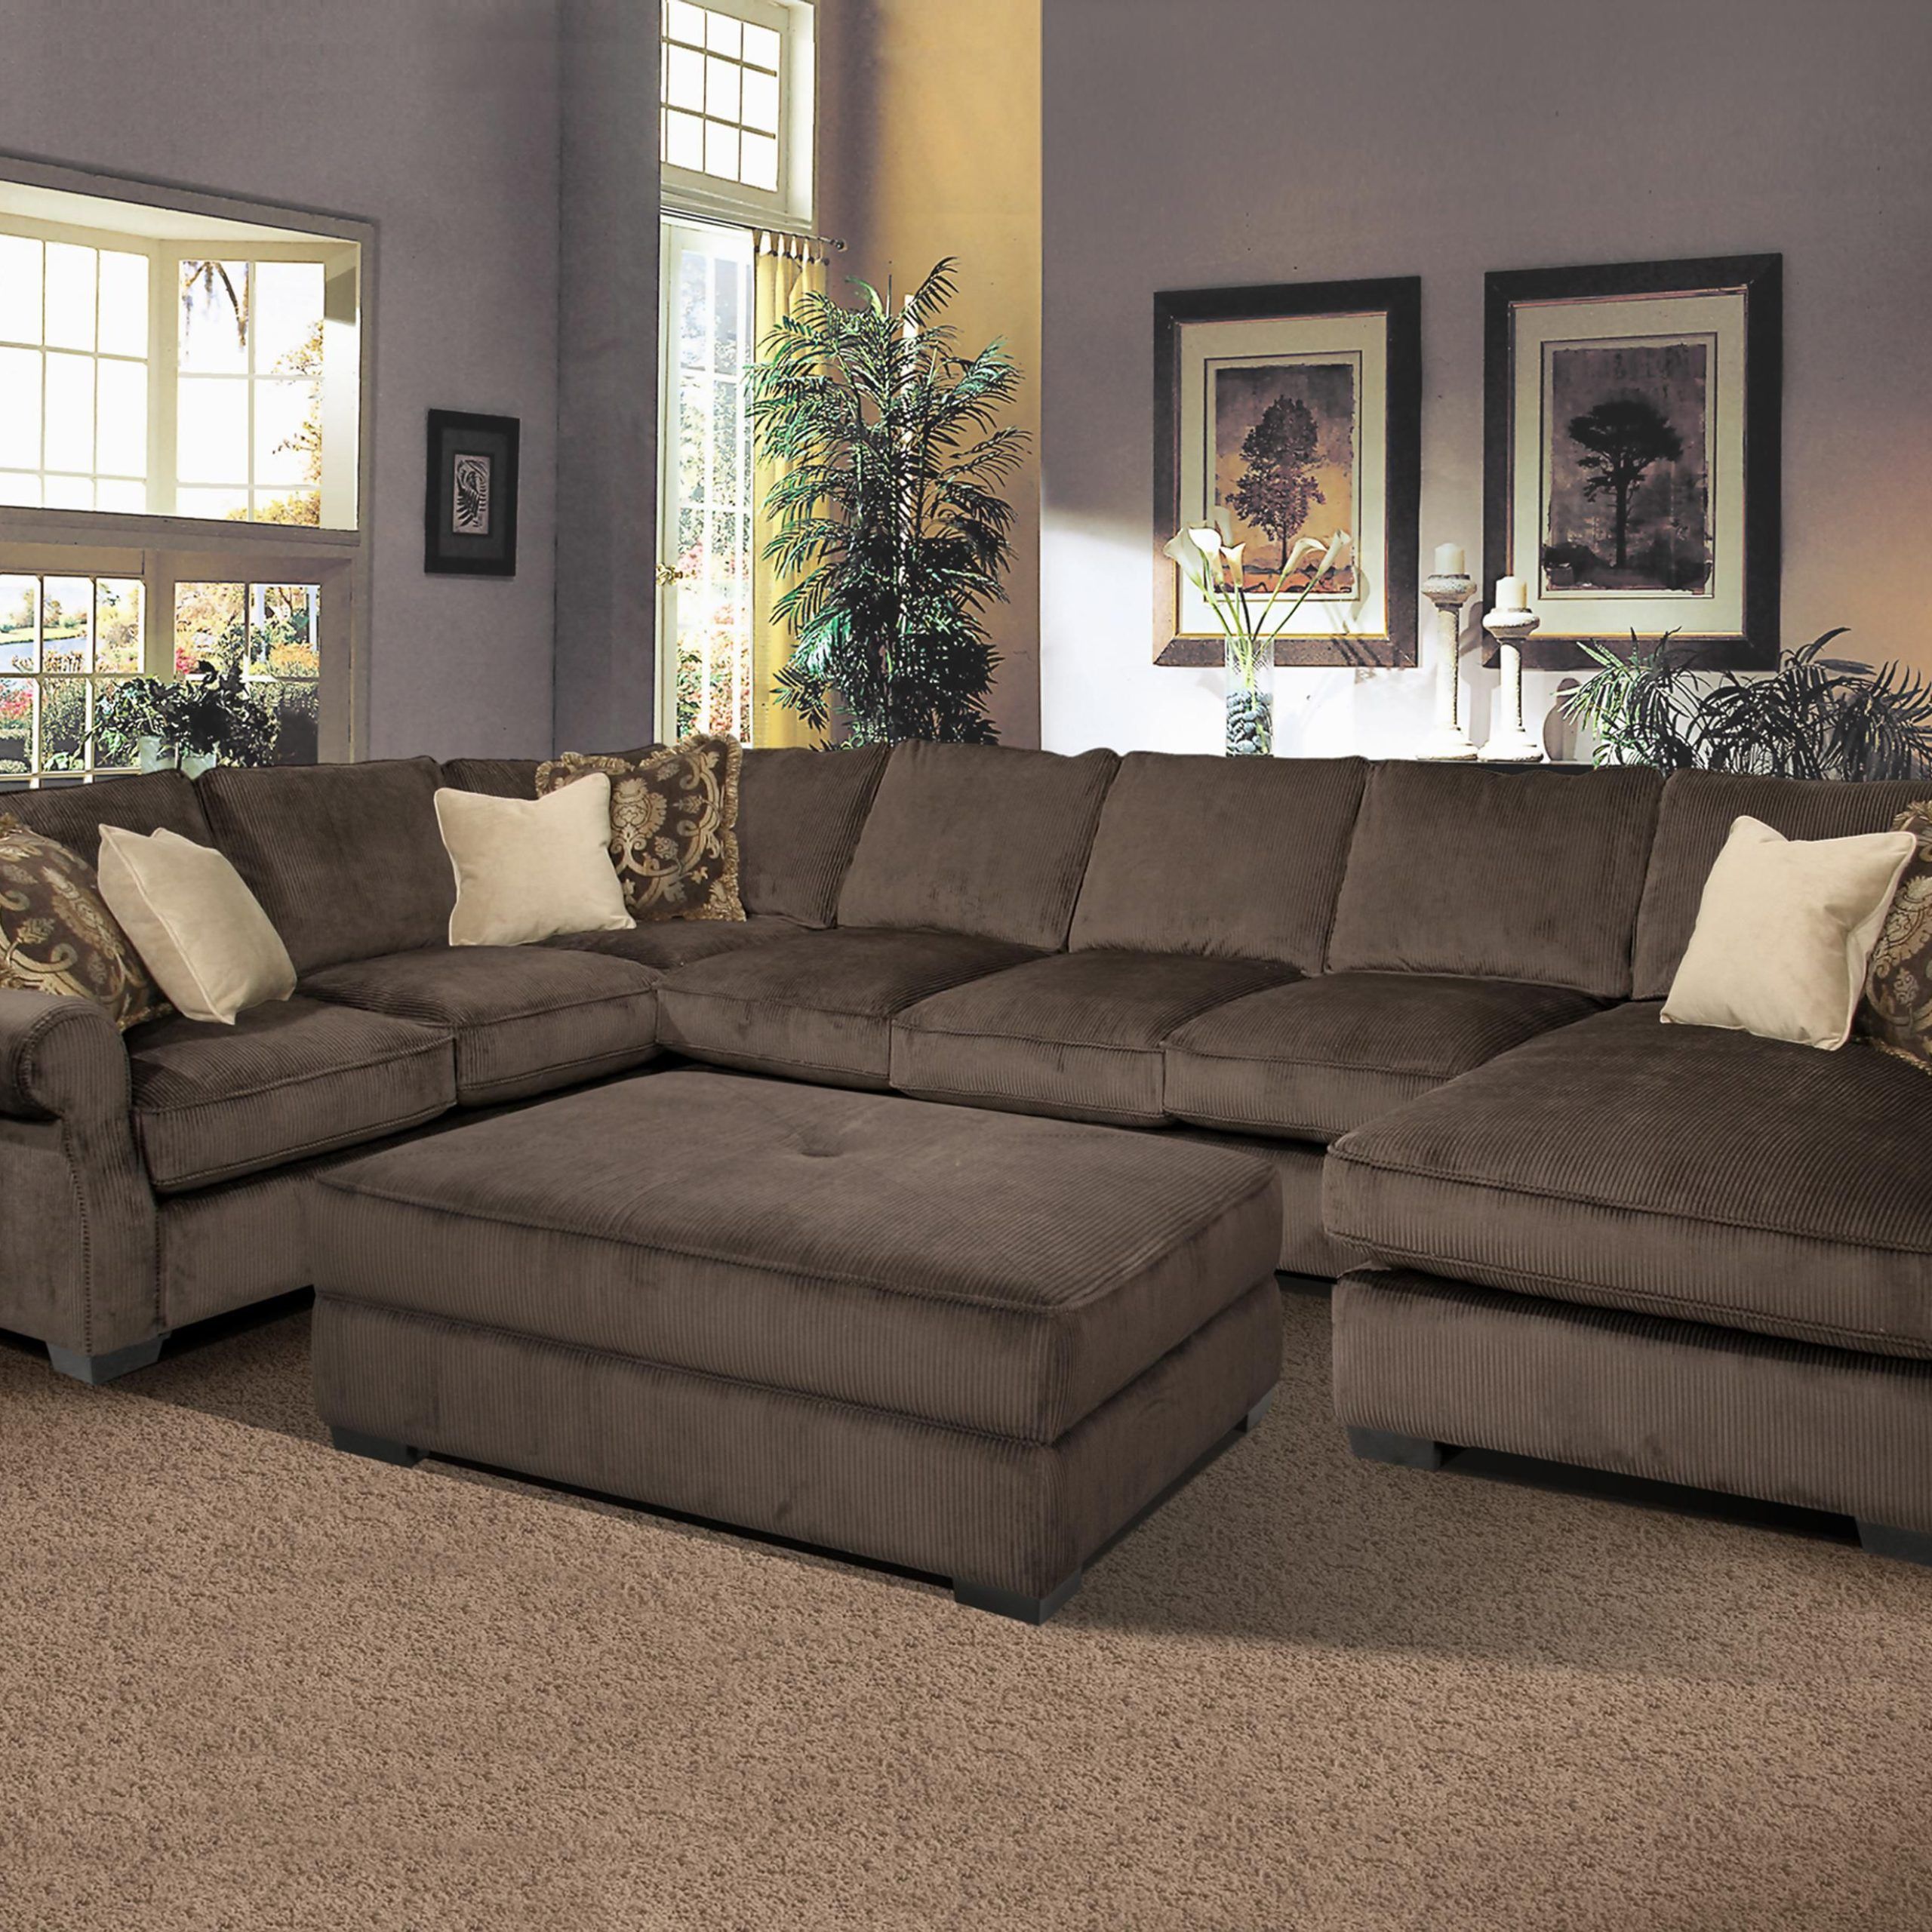 Well Known Furniture Elliot Fabric Microfiber 3 Piece Chaise Sectional Sofa For 104" Sectional Sofas (View 12 of 15)